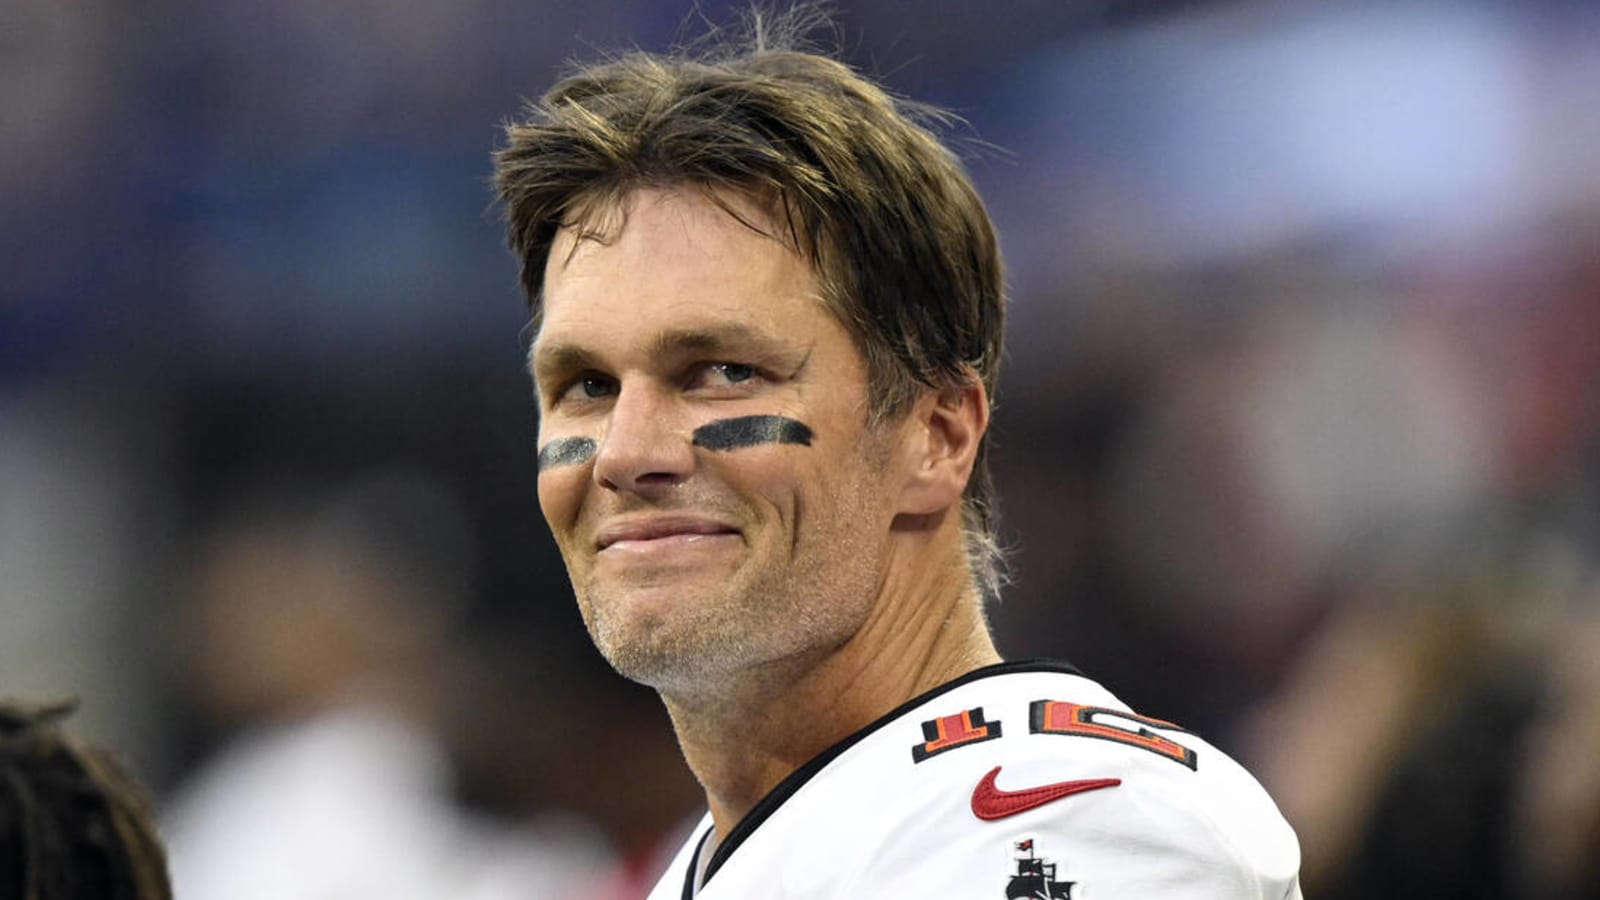 Tom Brady Taking Leave From Buccaneers for 'Personal' Matter